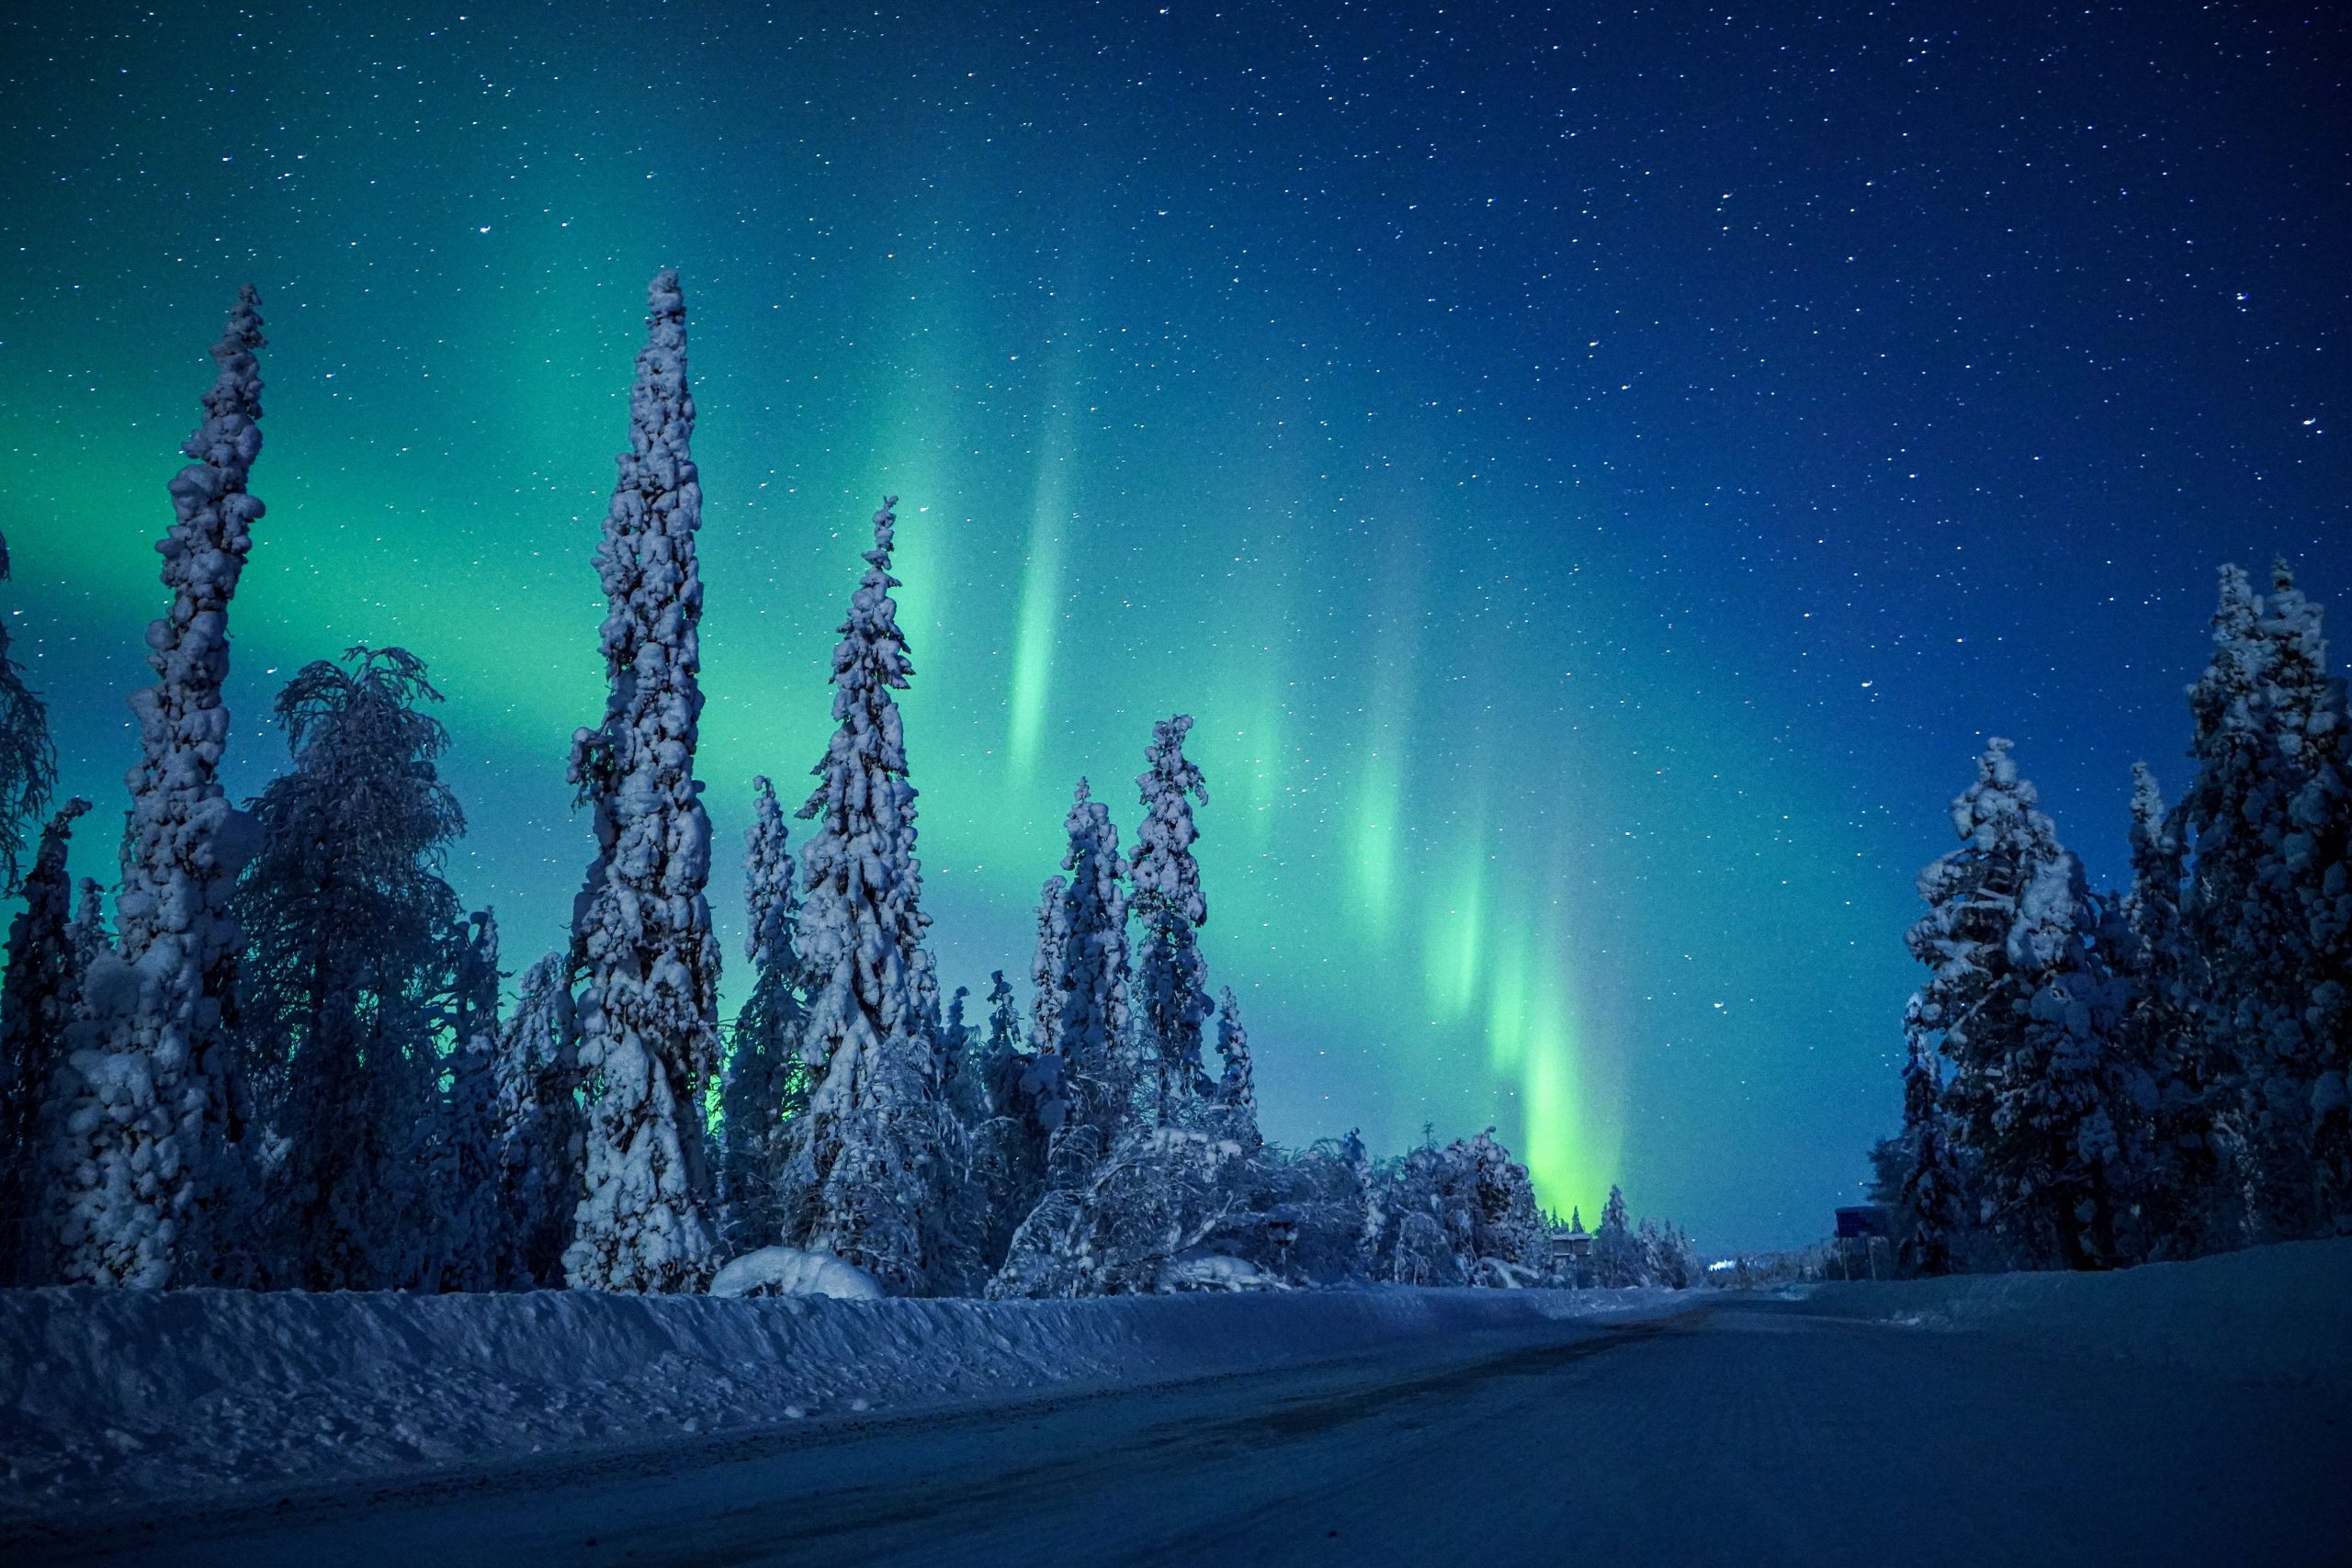 New Northern Lights discovered in Lapland